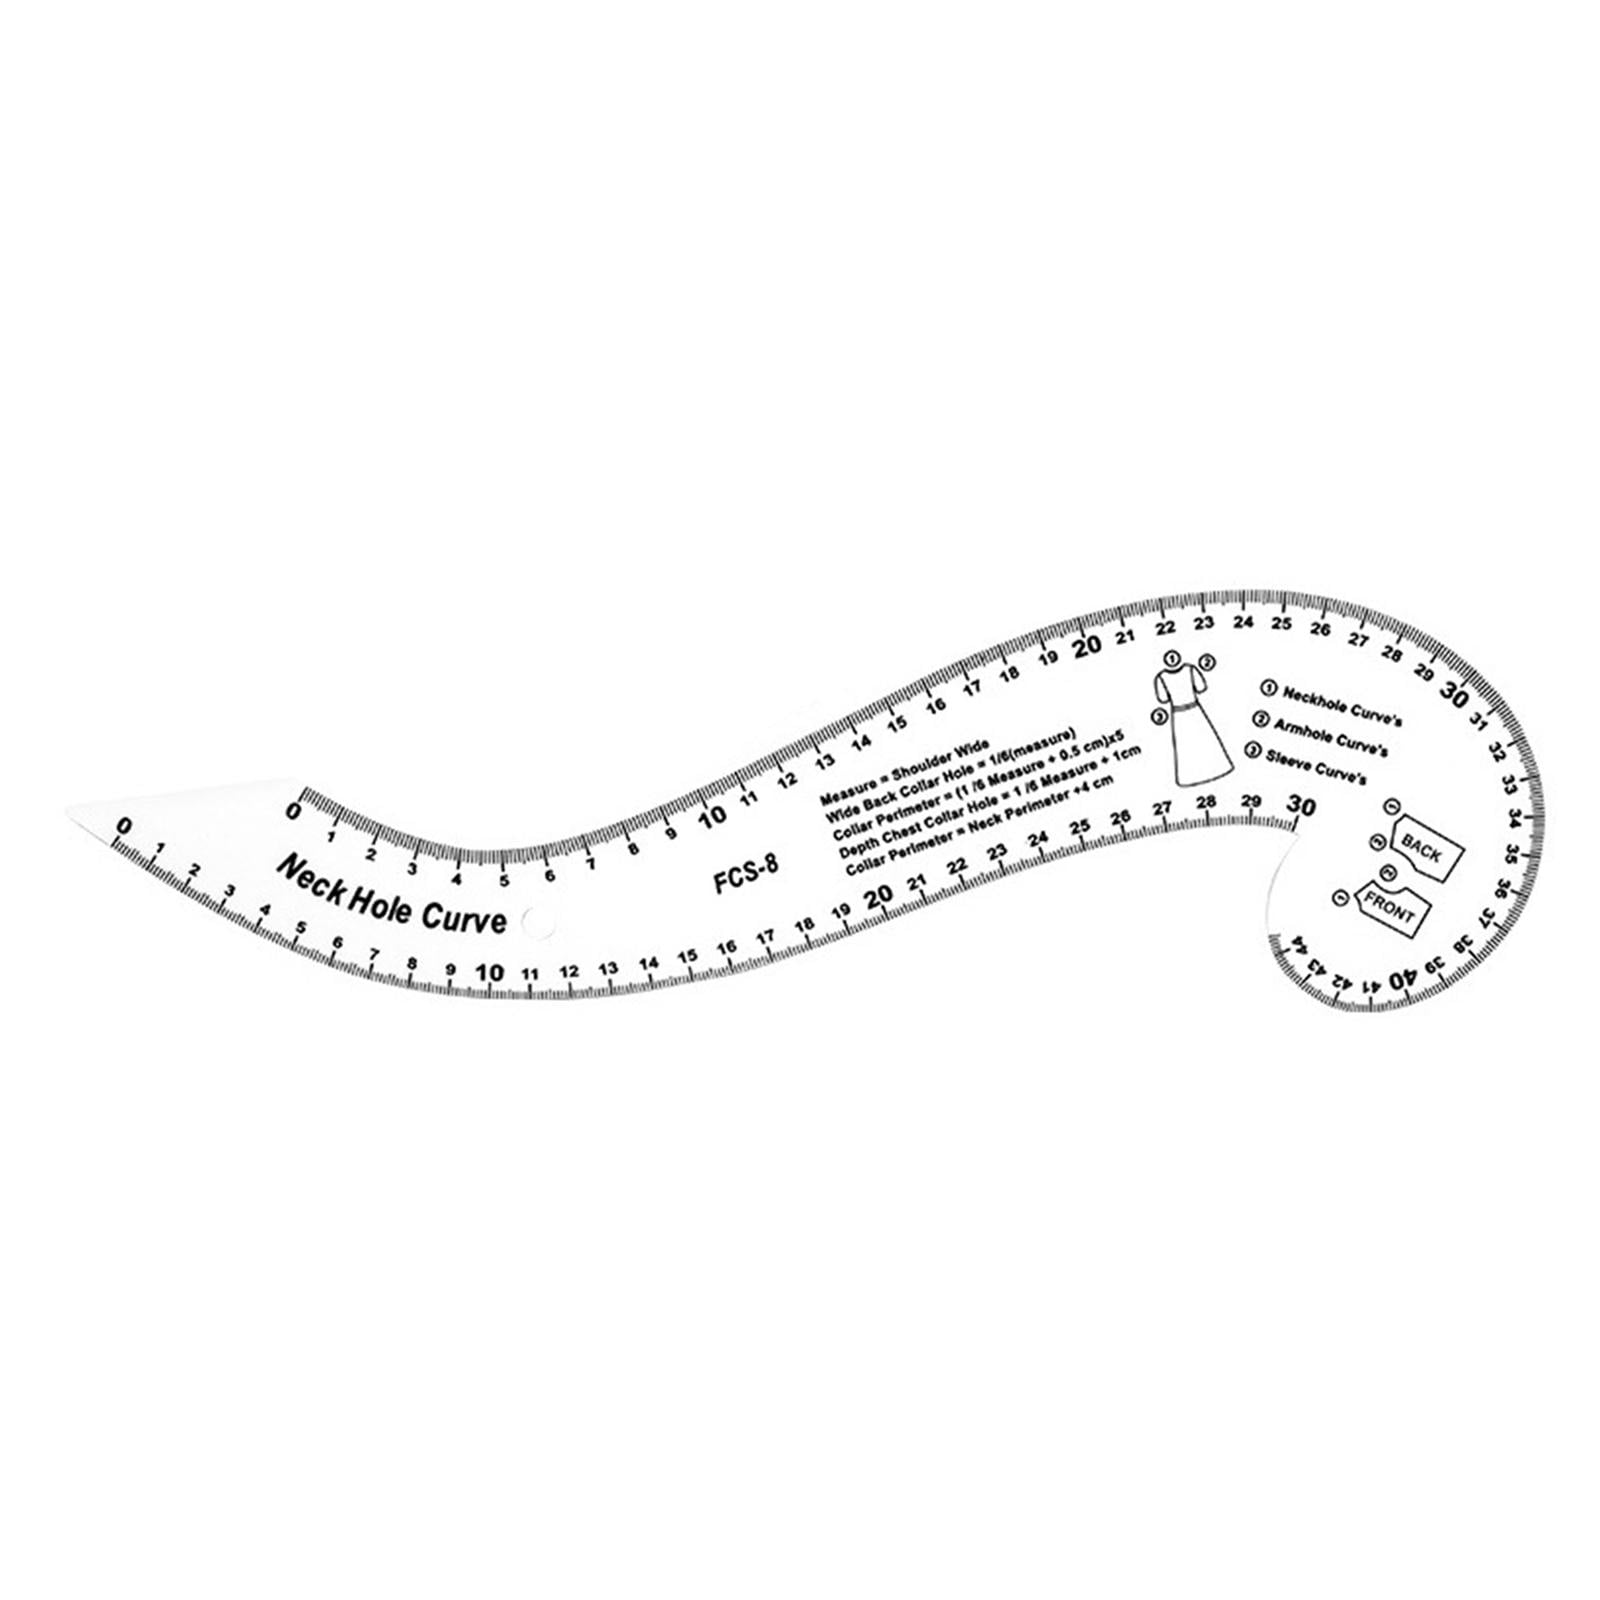 French Curve Ruler Tailor Tool Clothing Pattern Dress Curve Ruler Making  Template Metric Fashion Design Tailoring Measure , Neck Hole Curve 